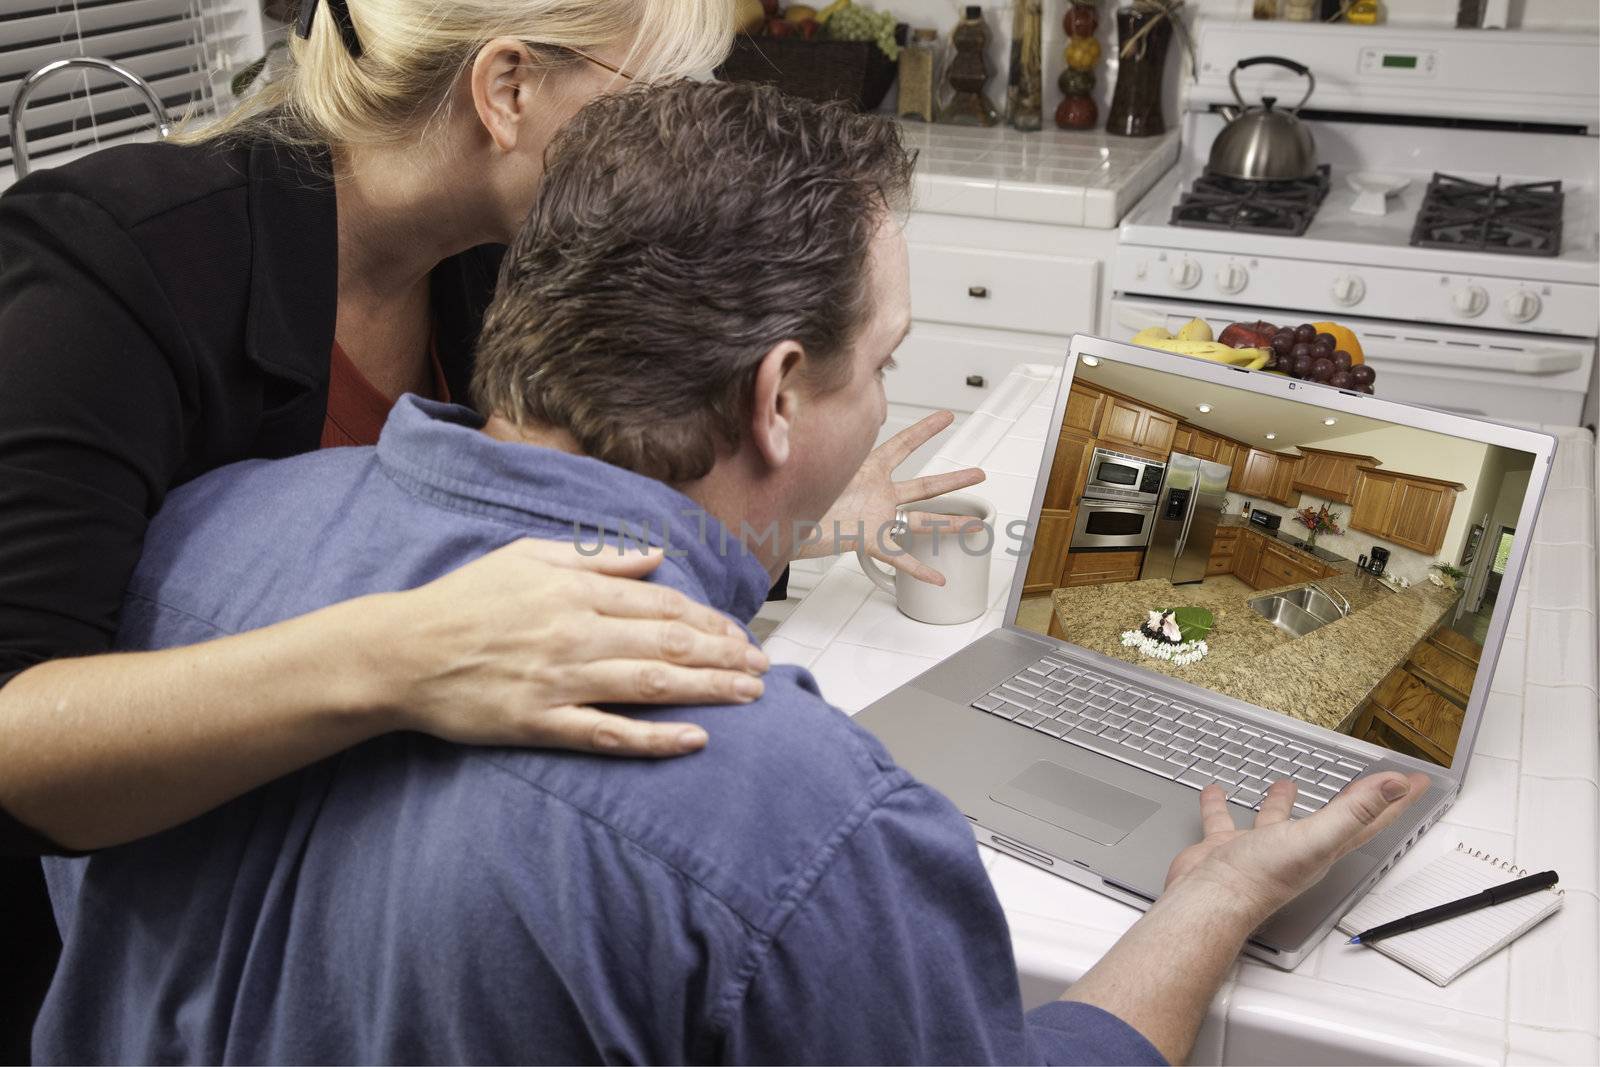 Couple In Kitchen Using Laptop - Home Improvement by Feverpitched